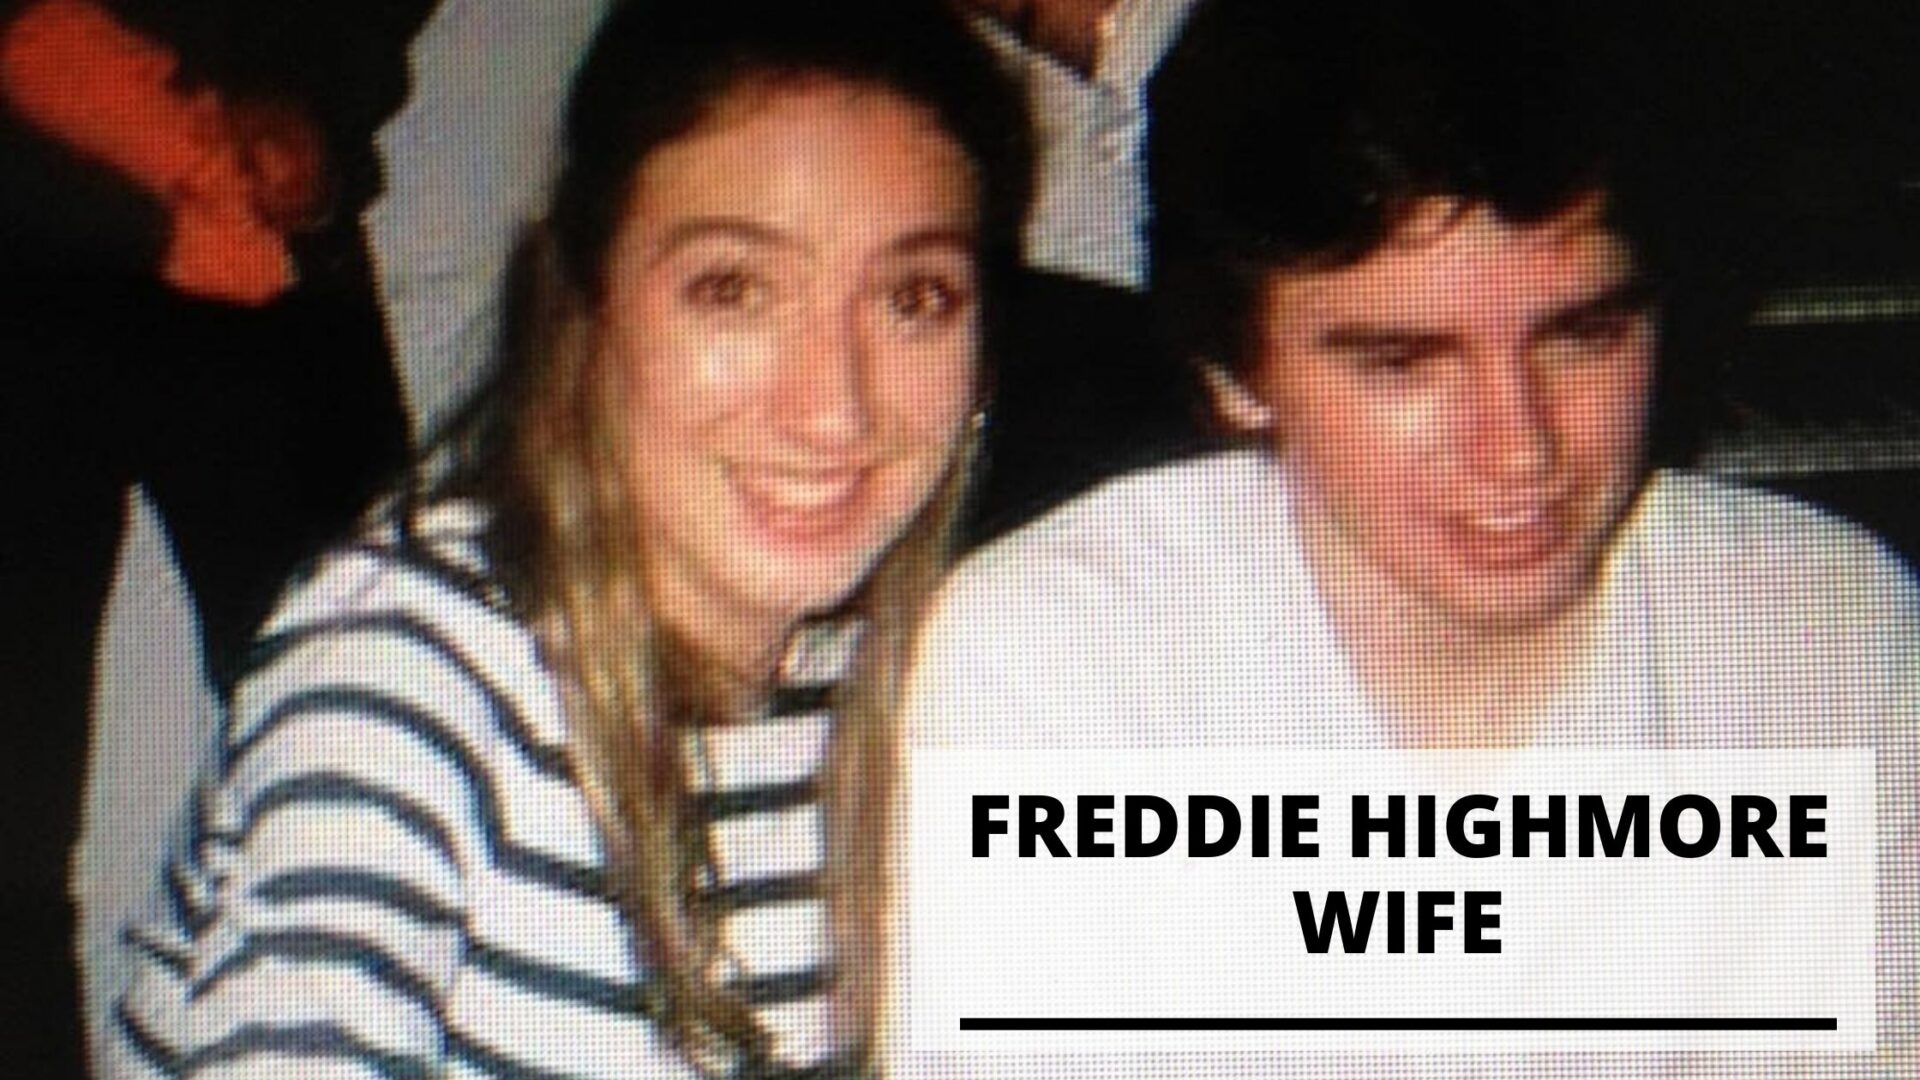 Does Freddie Highmore Have a Wife?